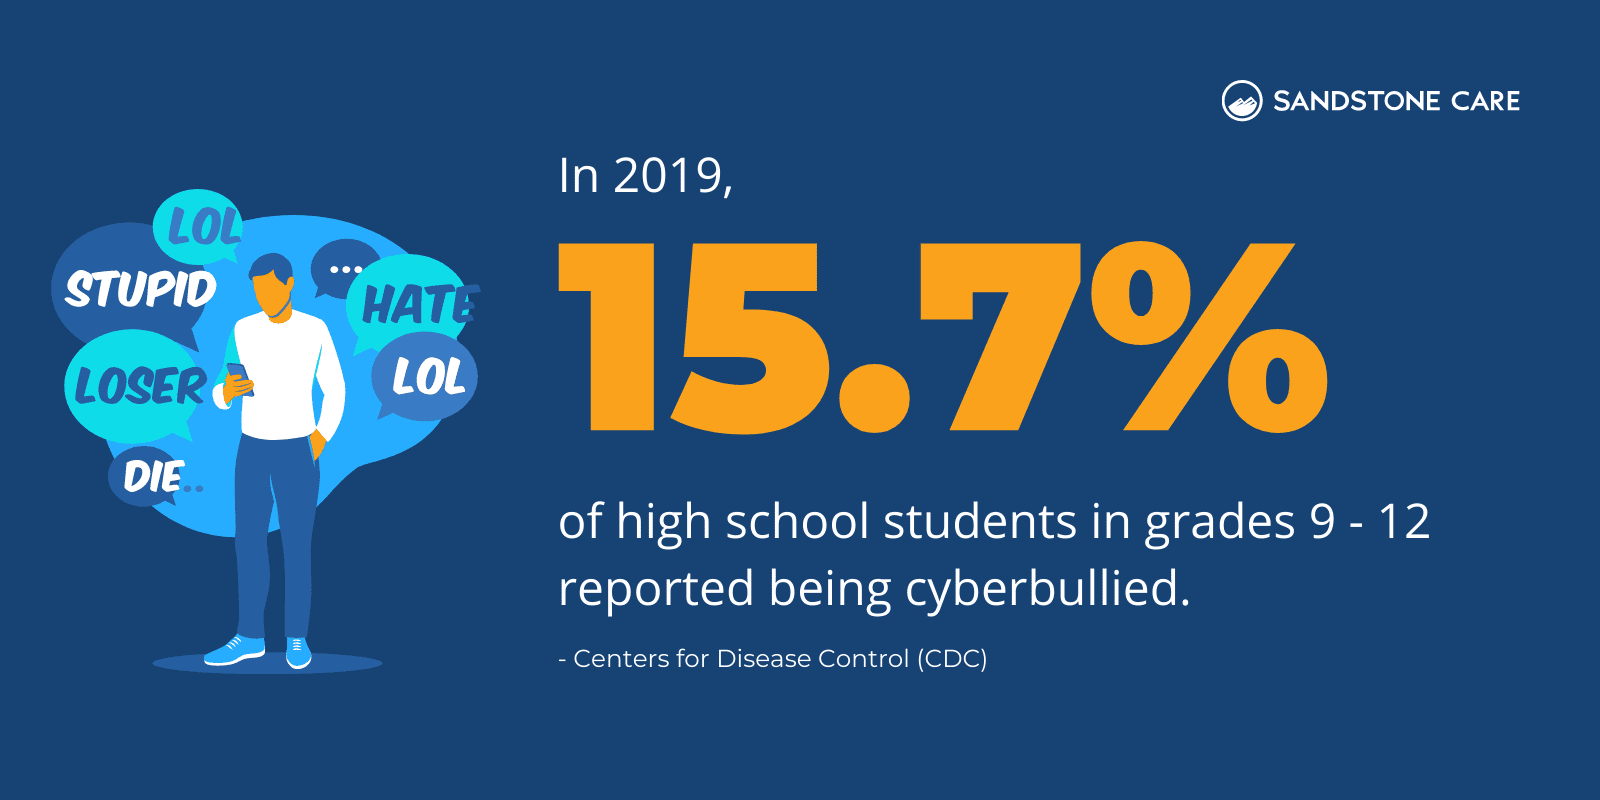 "In 2019, 15.7% of high school students in grades 9 - 12 reported being cyberbullied" text written next to an illustration of a man looking at his smartphone while mean word bubbles surround him.